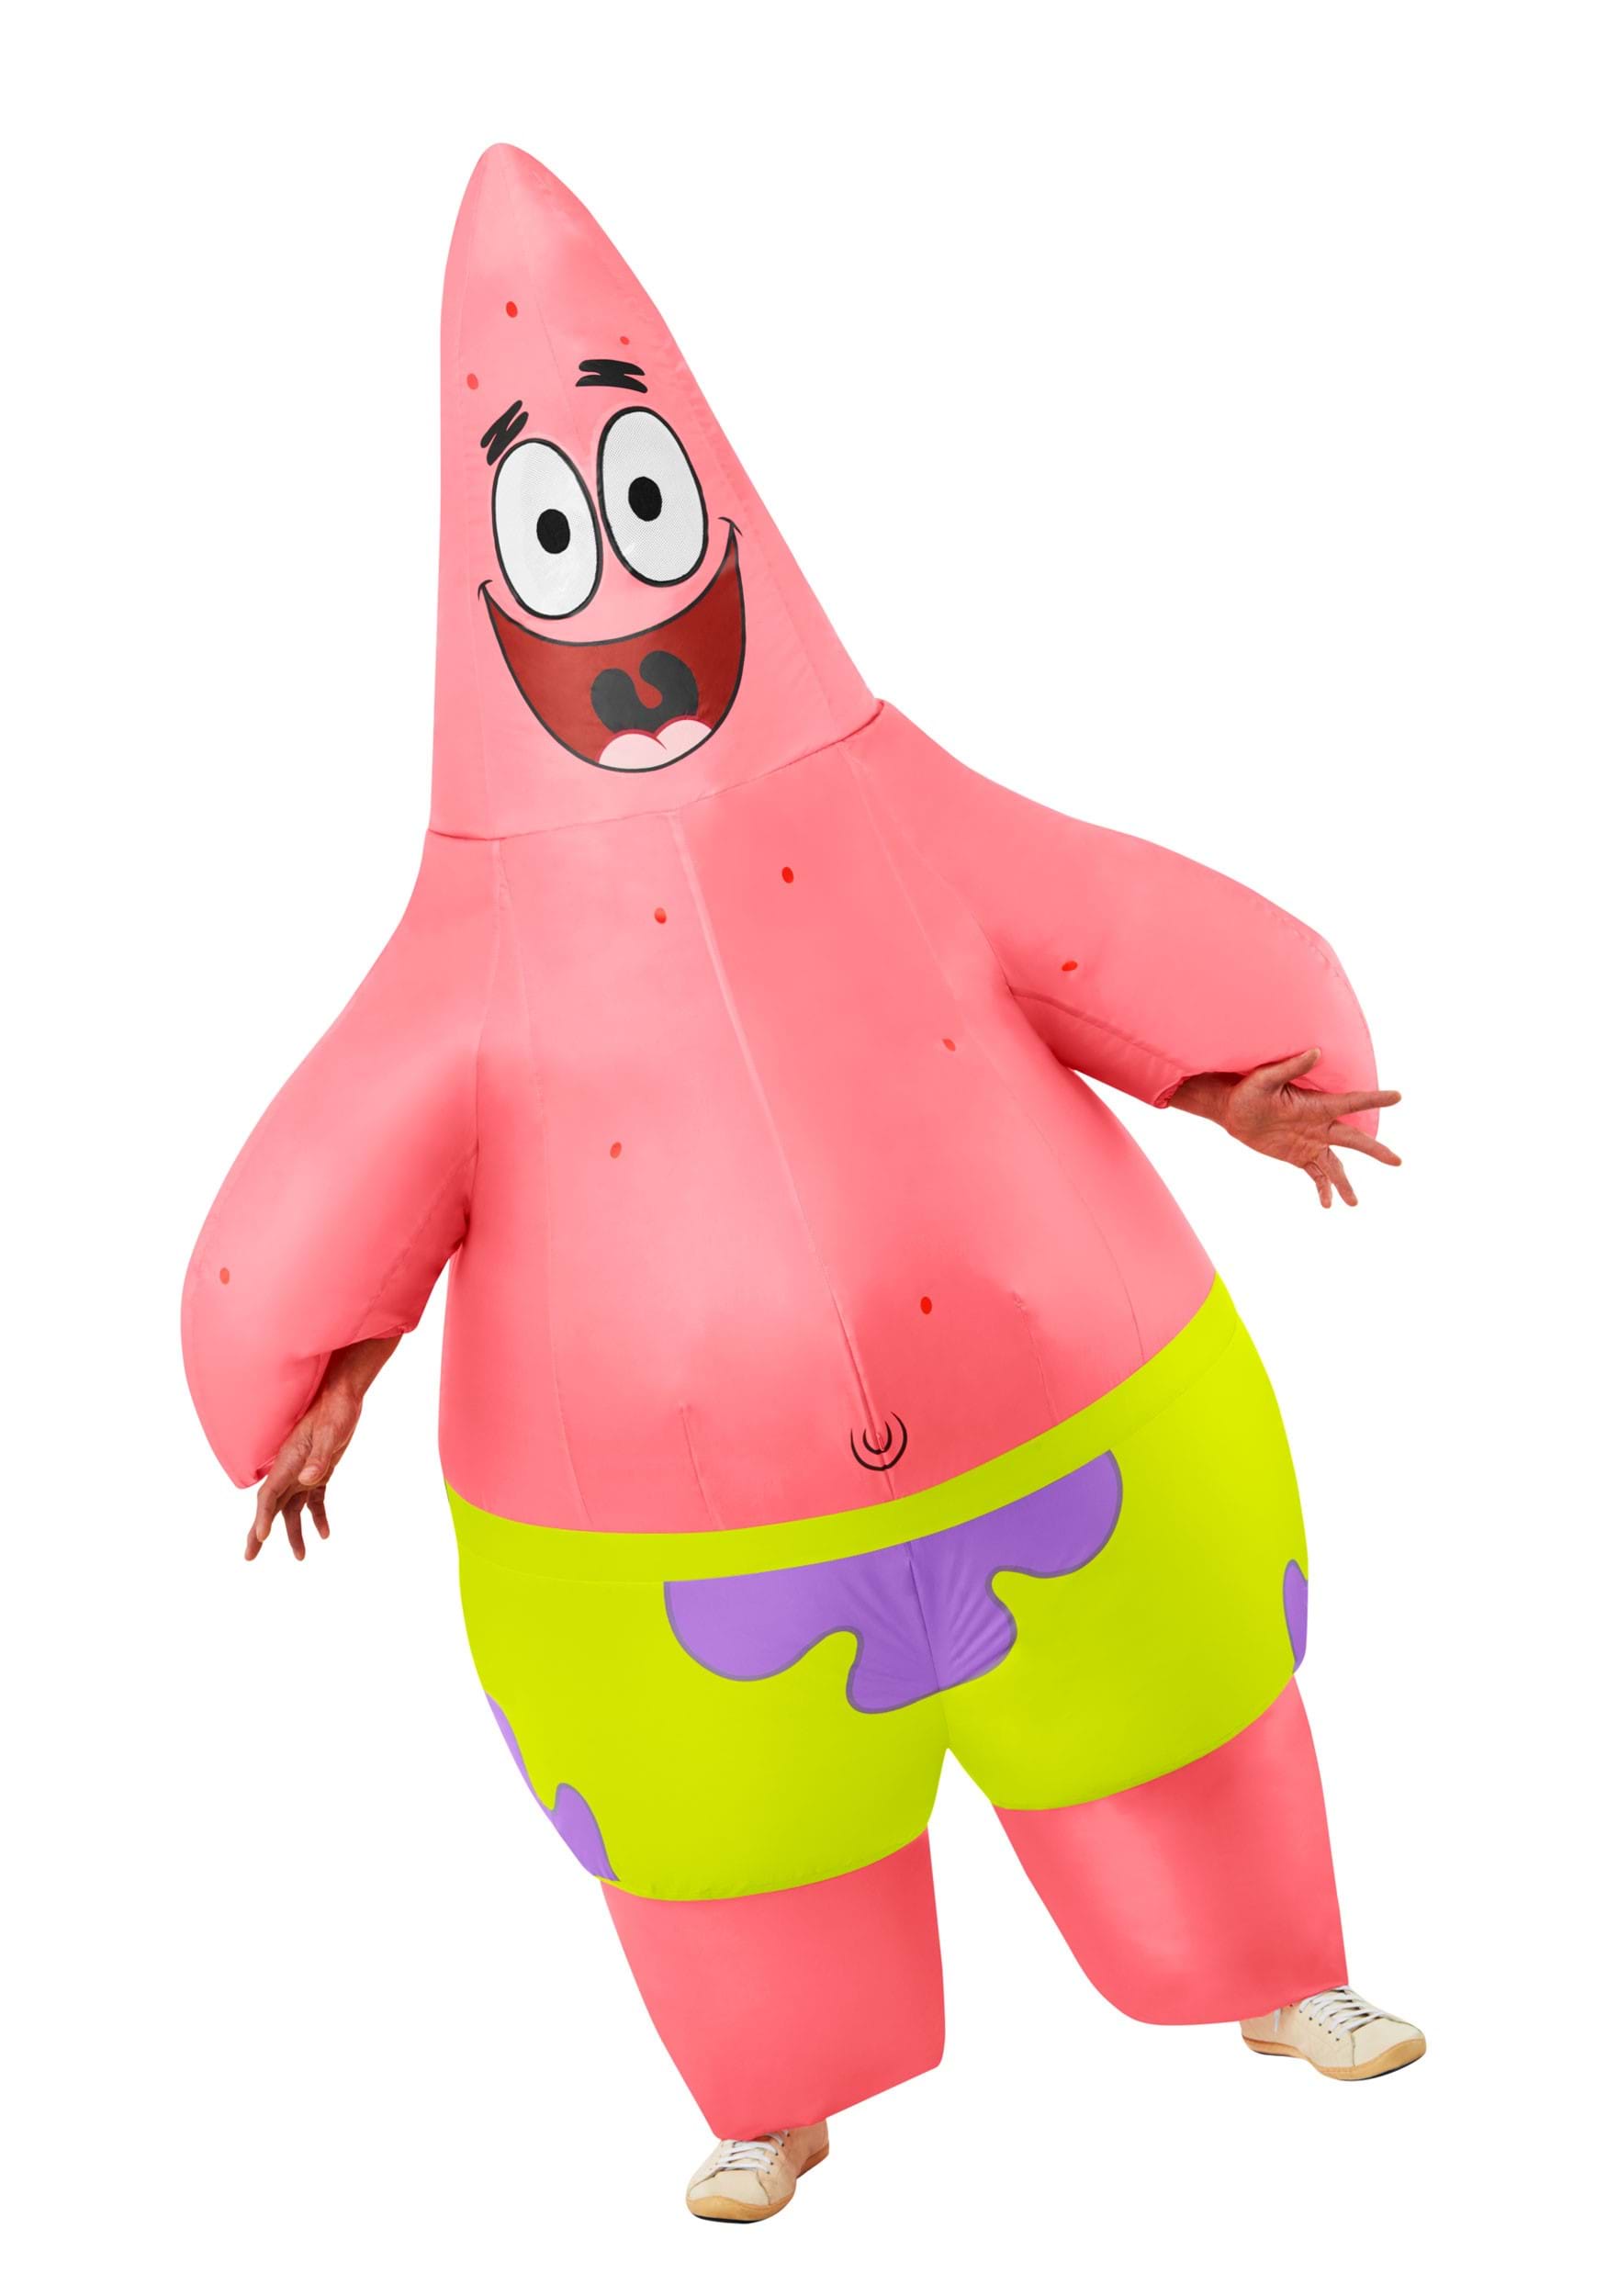 https://images.fun.com/products/86177/1-1/inflatable-patrick-star-adult-costume.jpg